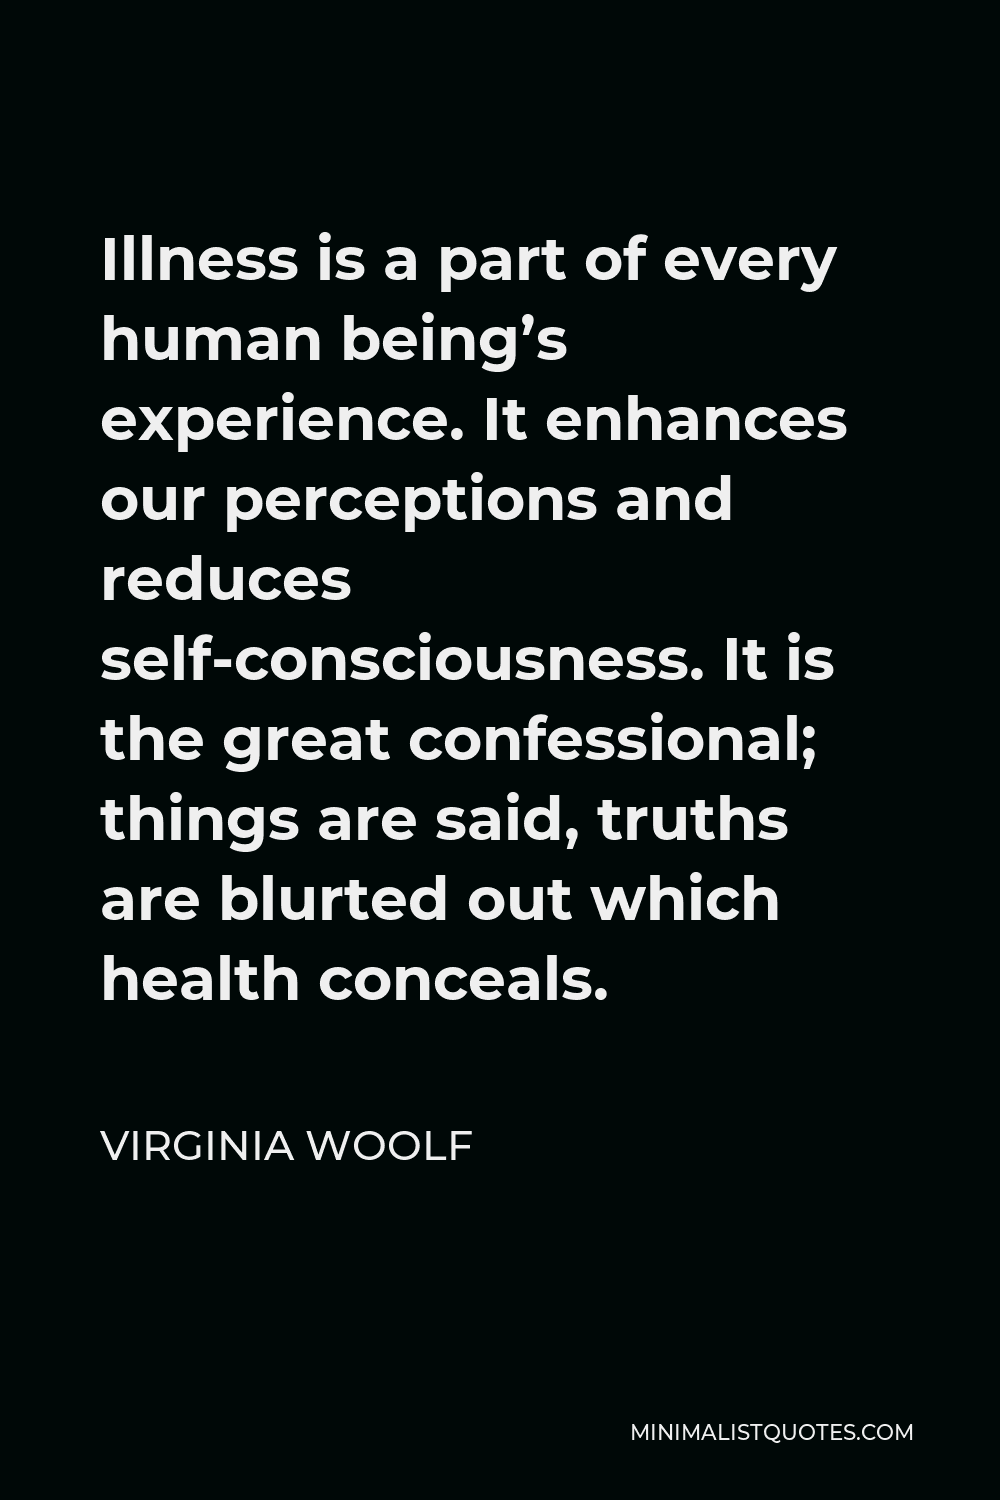 Virginia Woolf Quote - Illness is a part of every human being’s experience. It enhances our perceptions and reduces self-consciousness. It is the great confessional; things are said, truths are blurted out which health conceals.